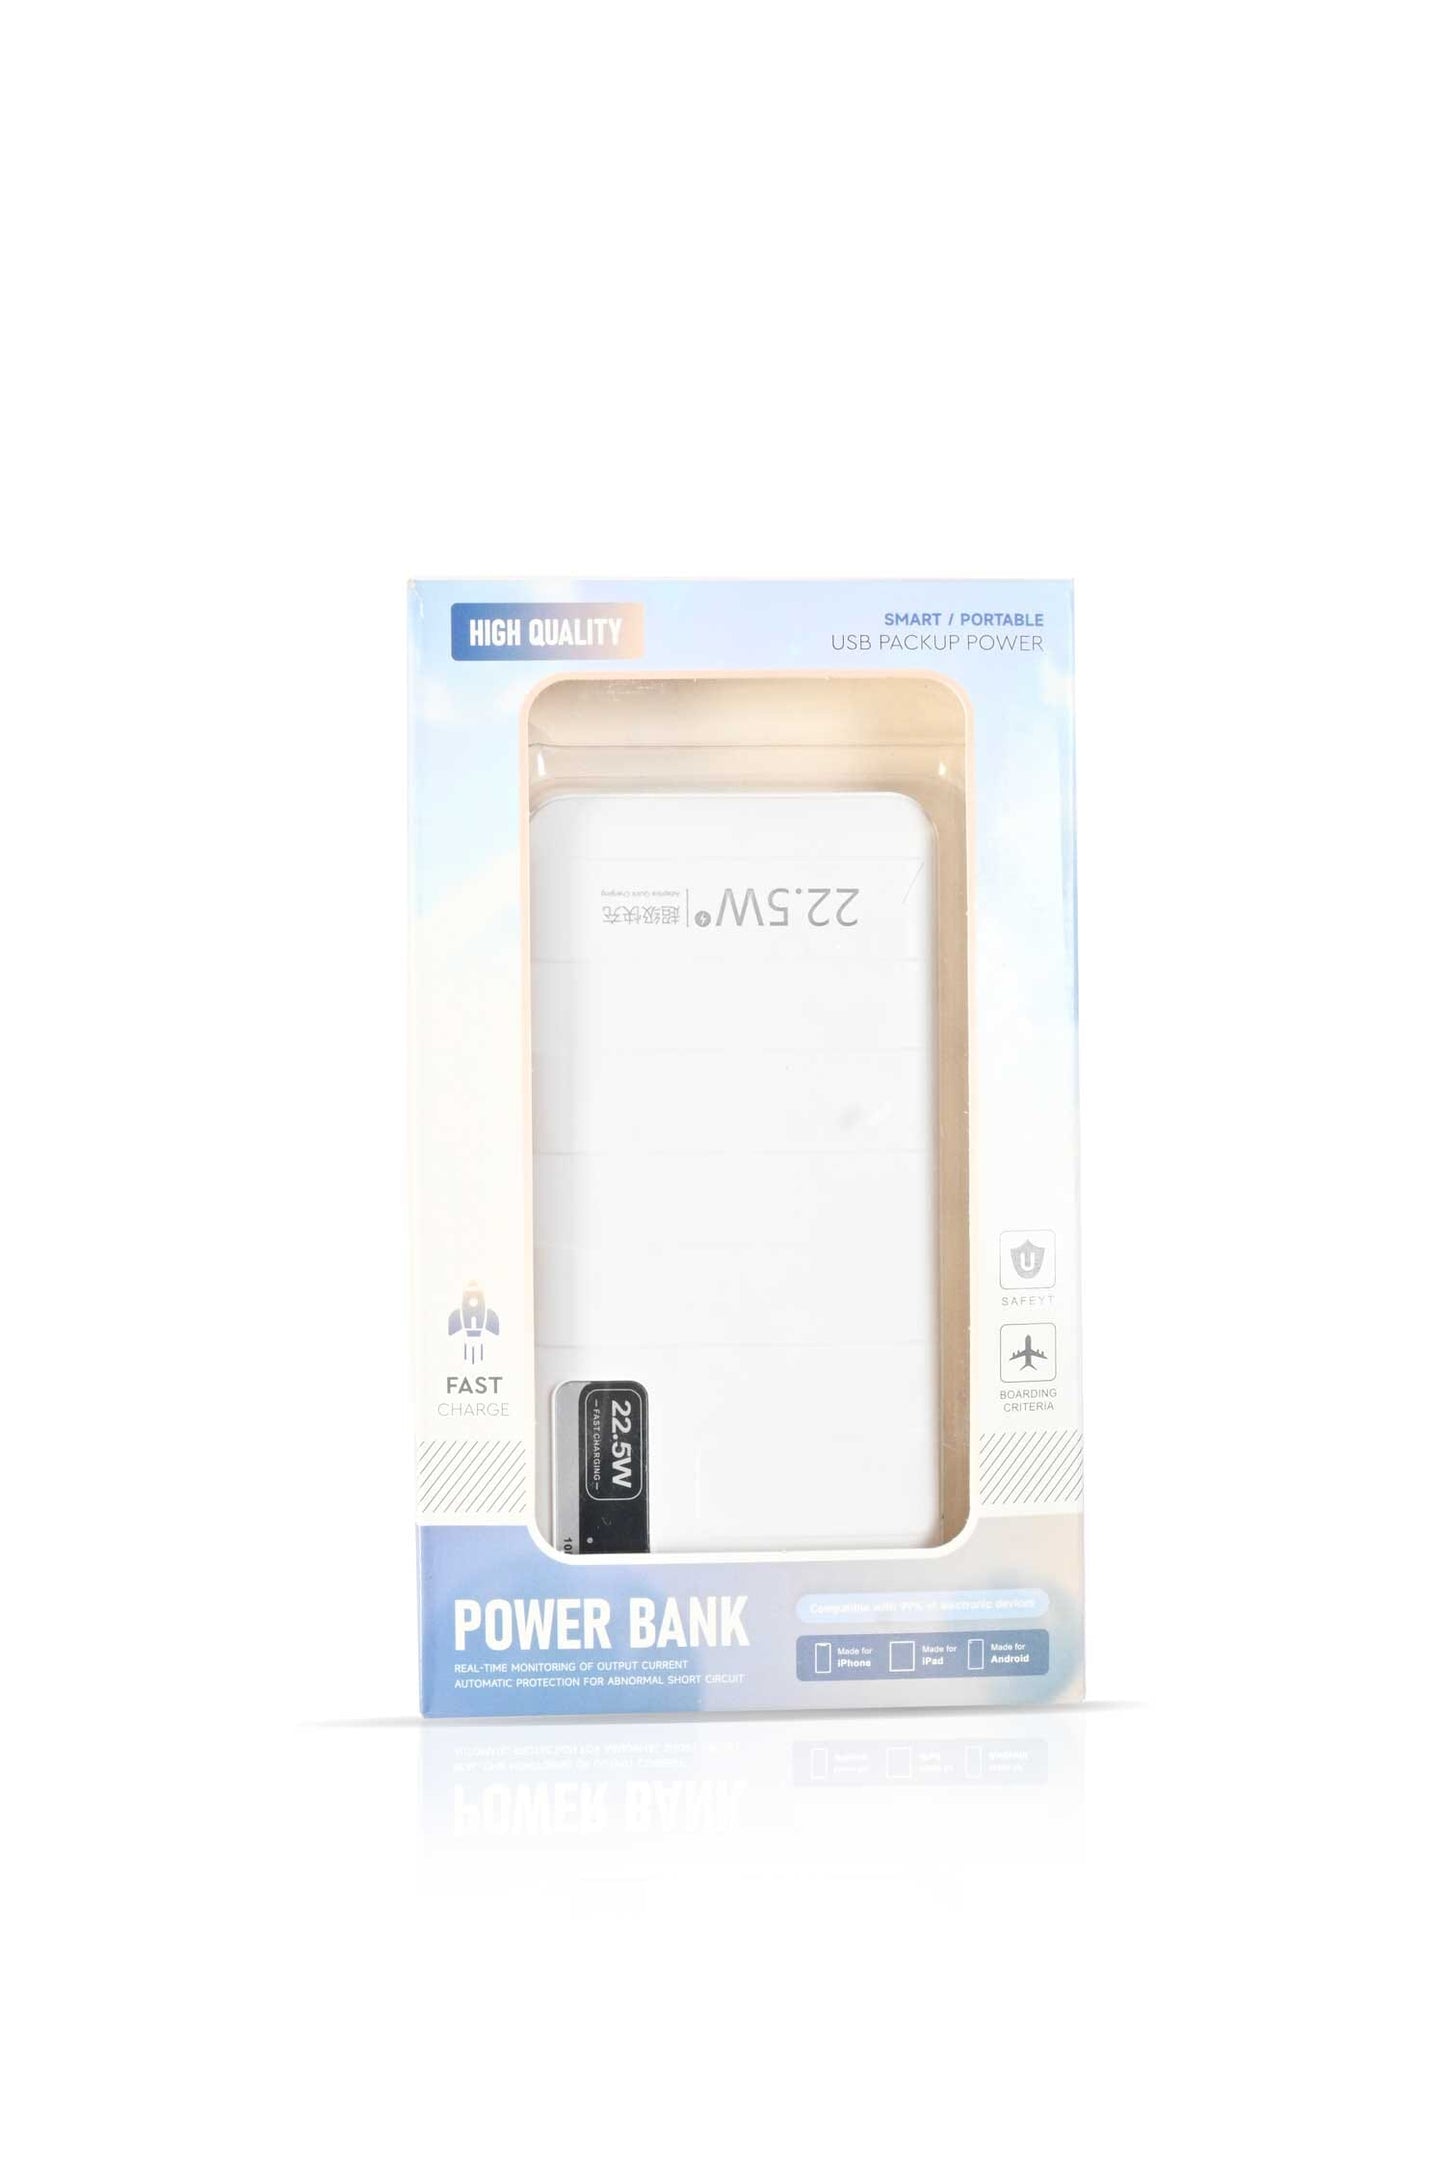 LDK0001 22.5W Fast Charging Power Bank Mobile Accessories SDQ 